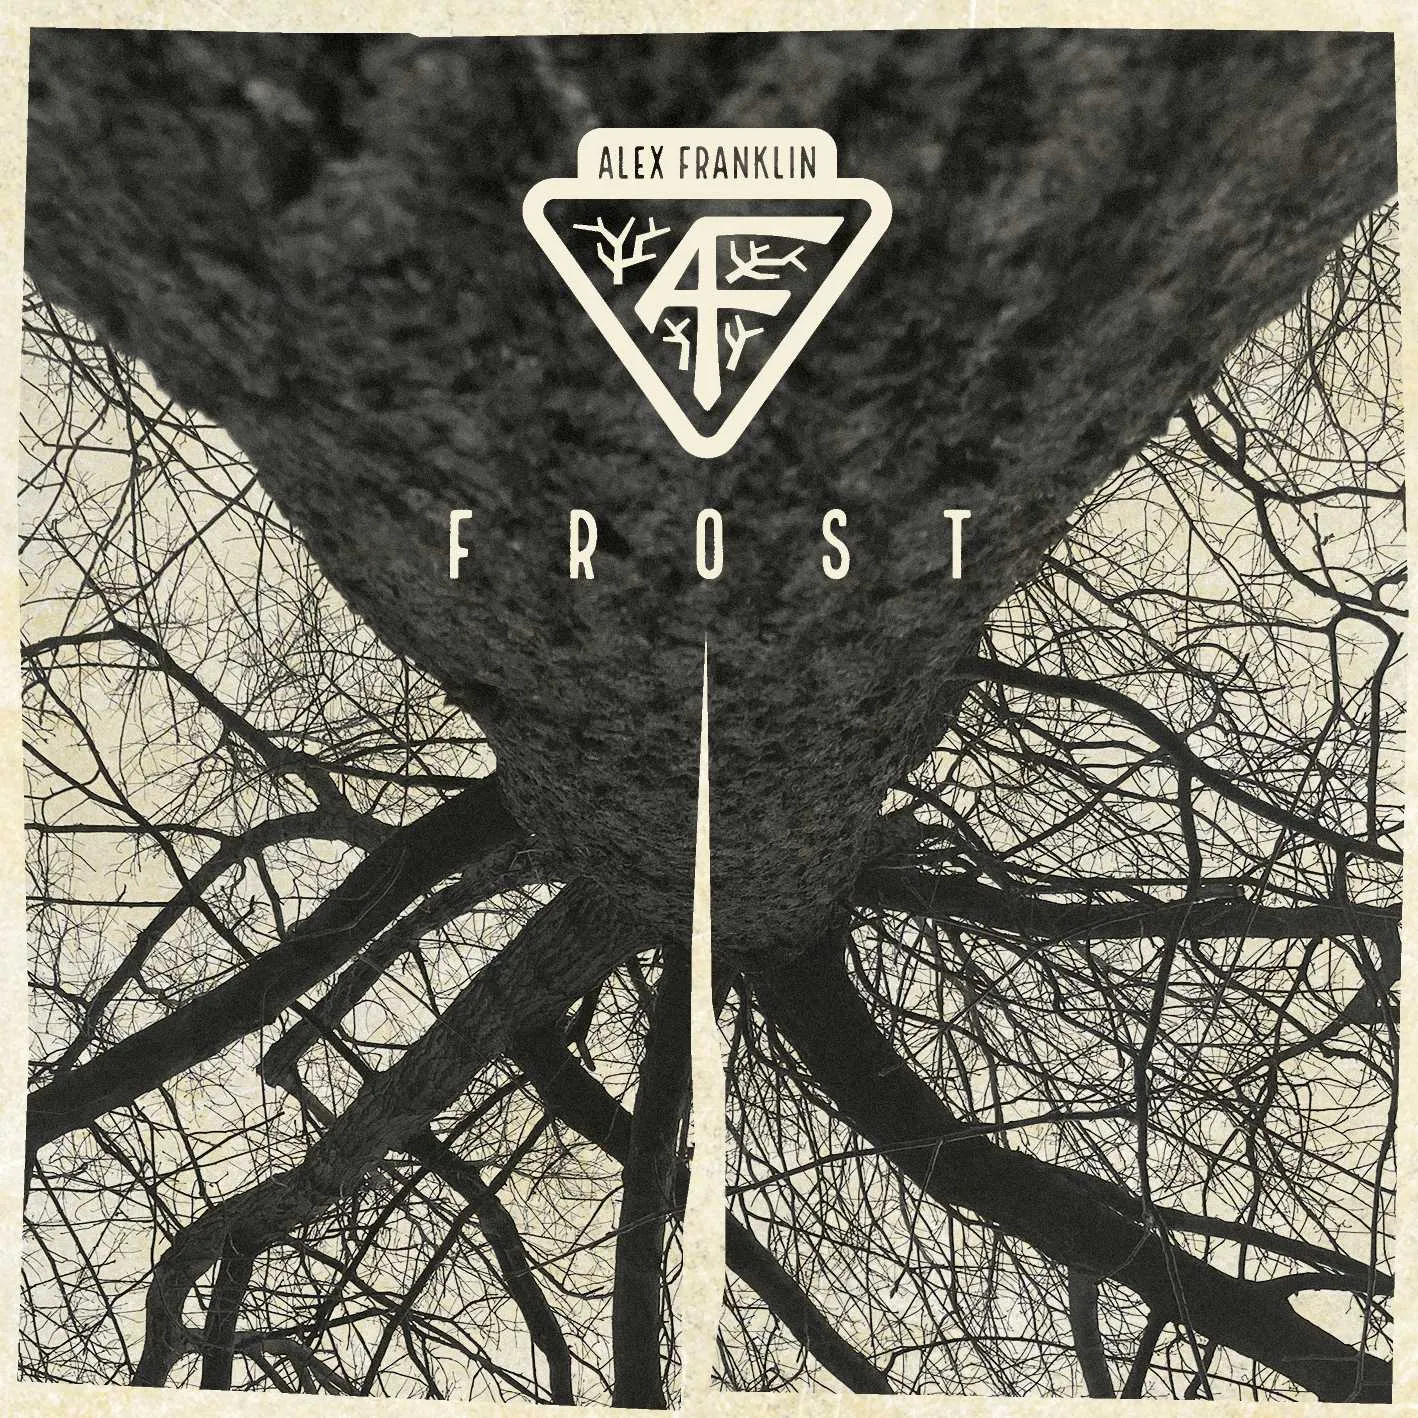 Album cover for “FROST” by Alex Franklin